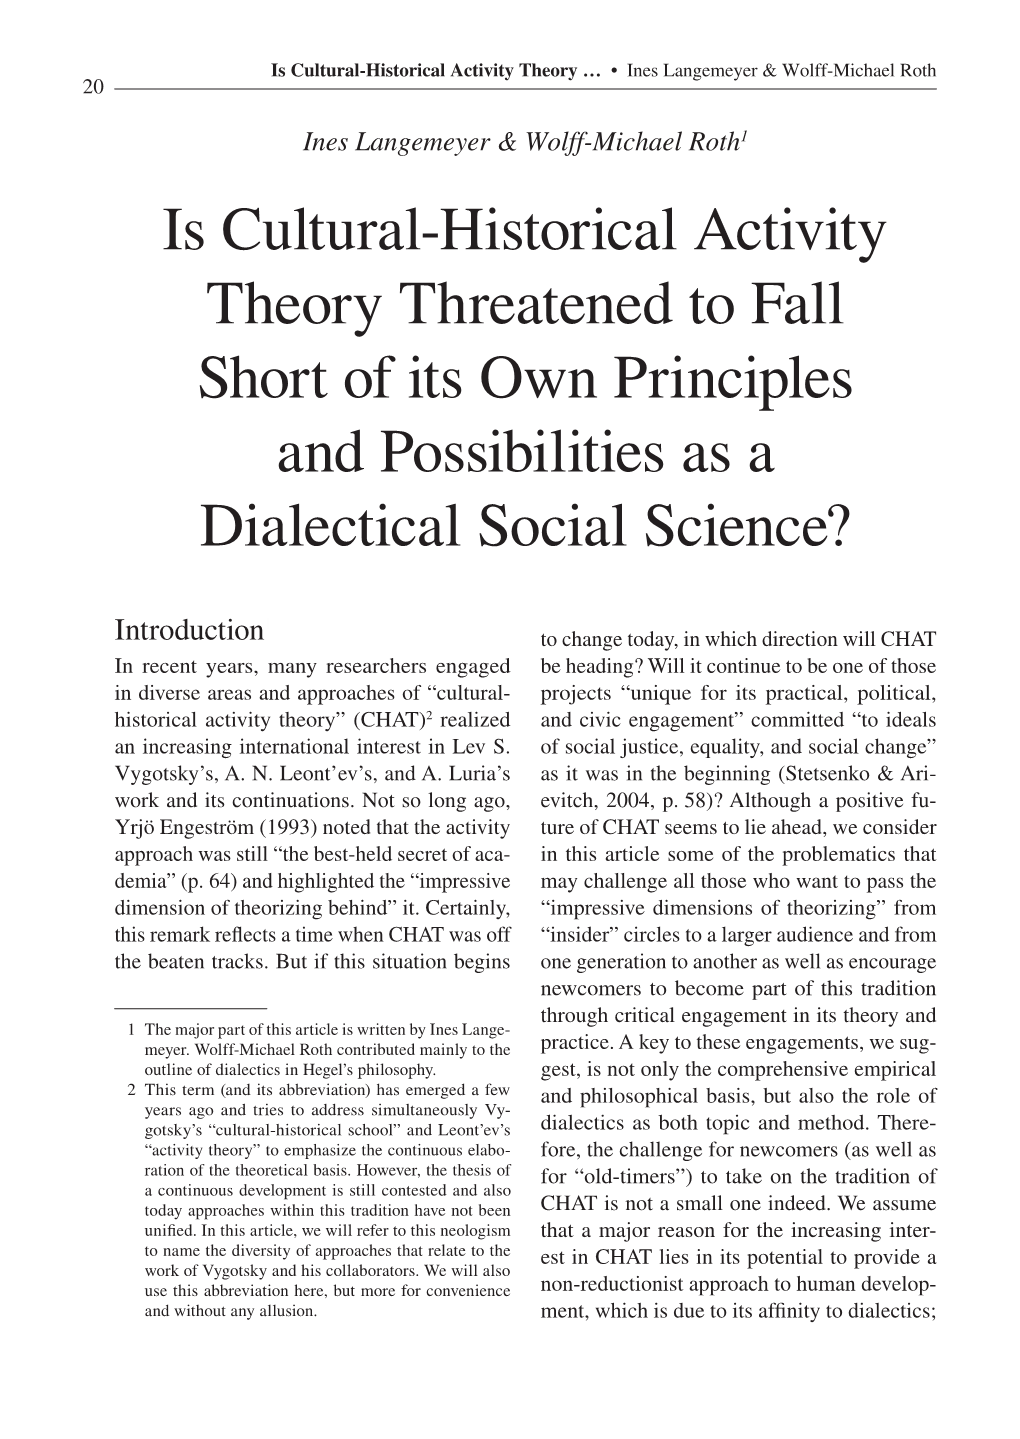 Is Cultural-Historical Activity Theory Threatened to Fall Short of Its Own